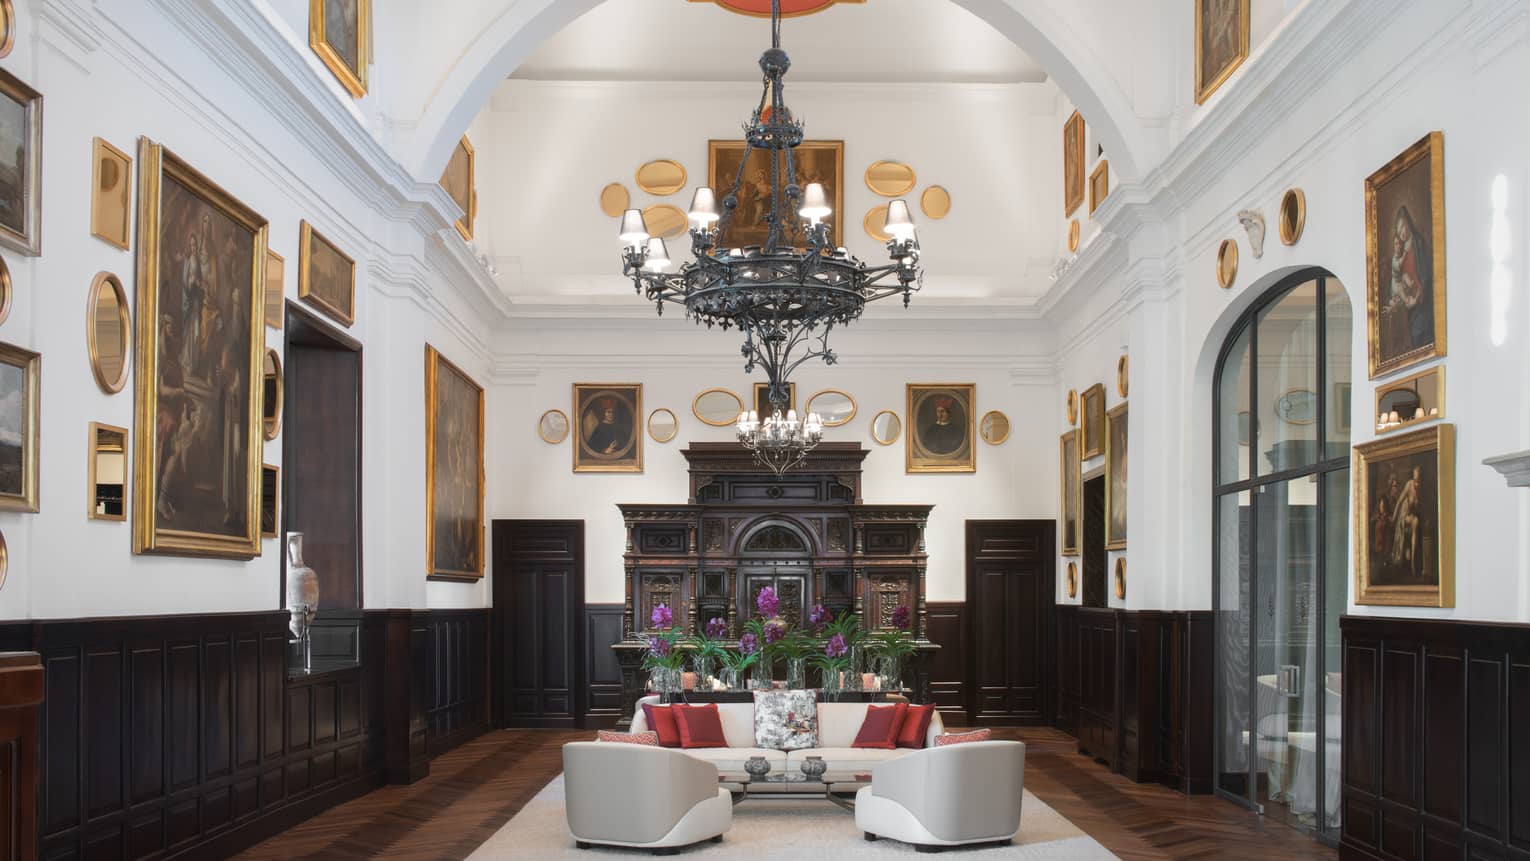 Sala Museo with artwork lining both walls, white leather furniture, high ceilings, wrought iron chandelier, fireplace